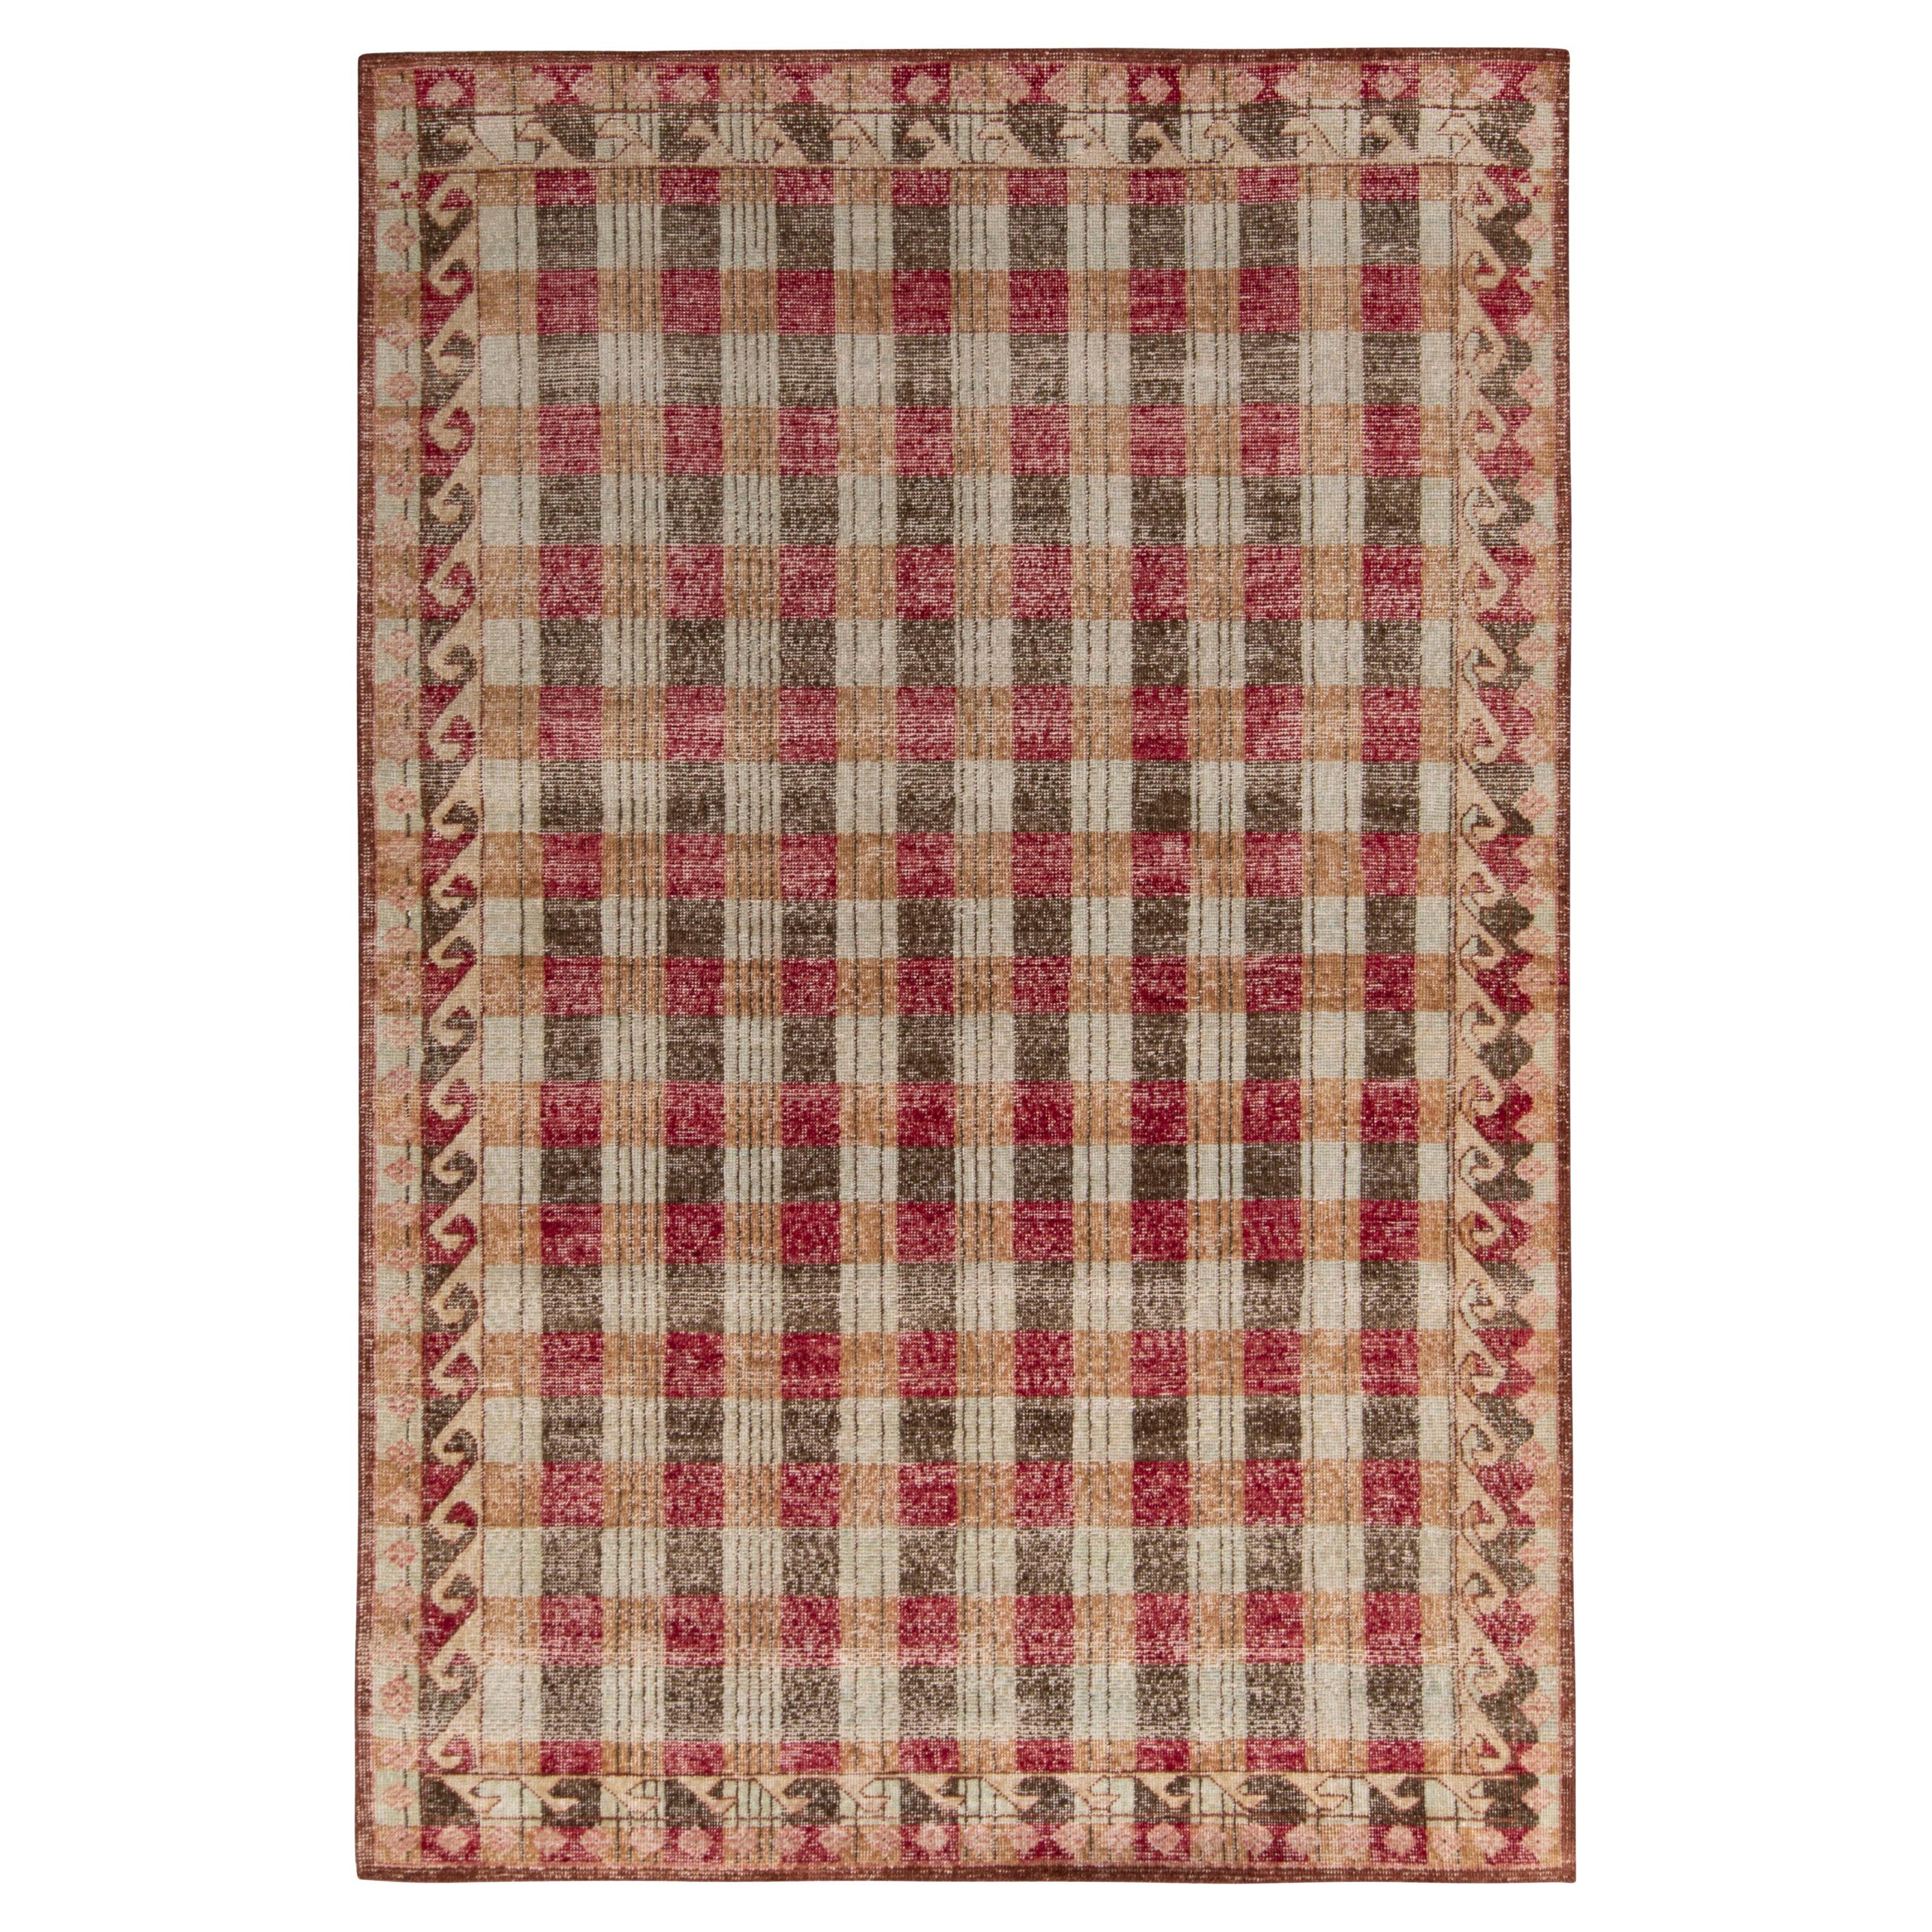 Rug & Kilim's Distressed Classic Style Teppich in Beige-Braun, rotes geometrisches Muster